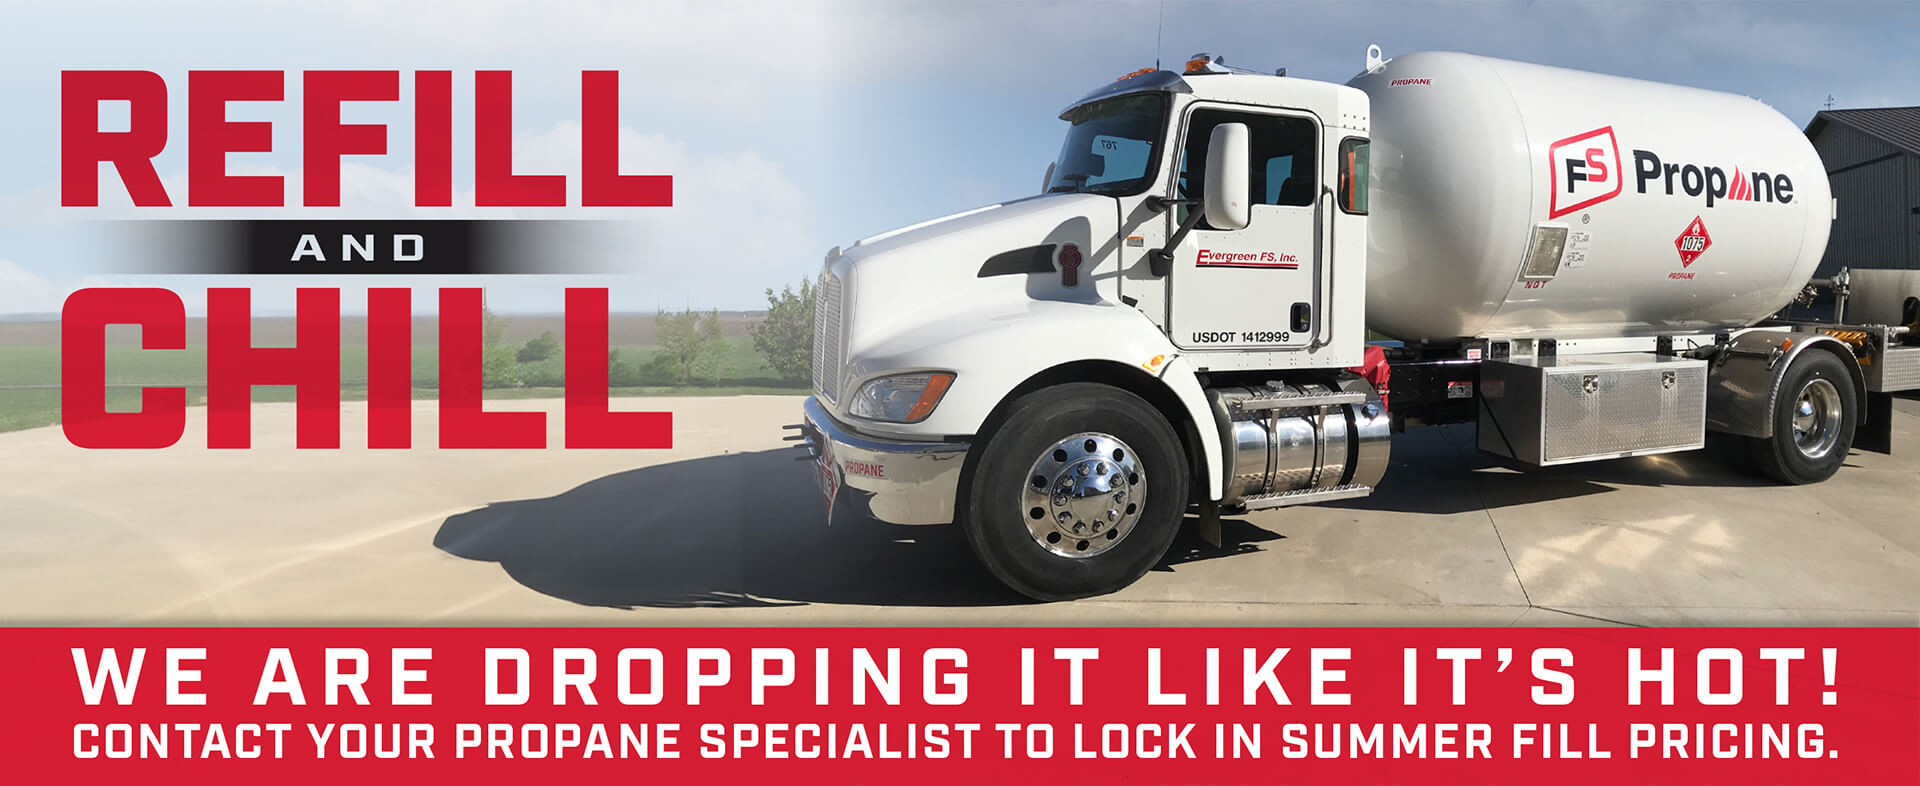 Refill and Chill - Image of an FS Propane Truck promoting Summer Fill Pricing